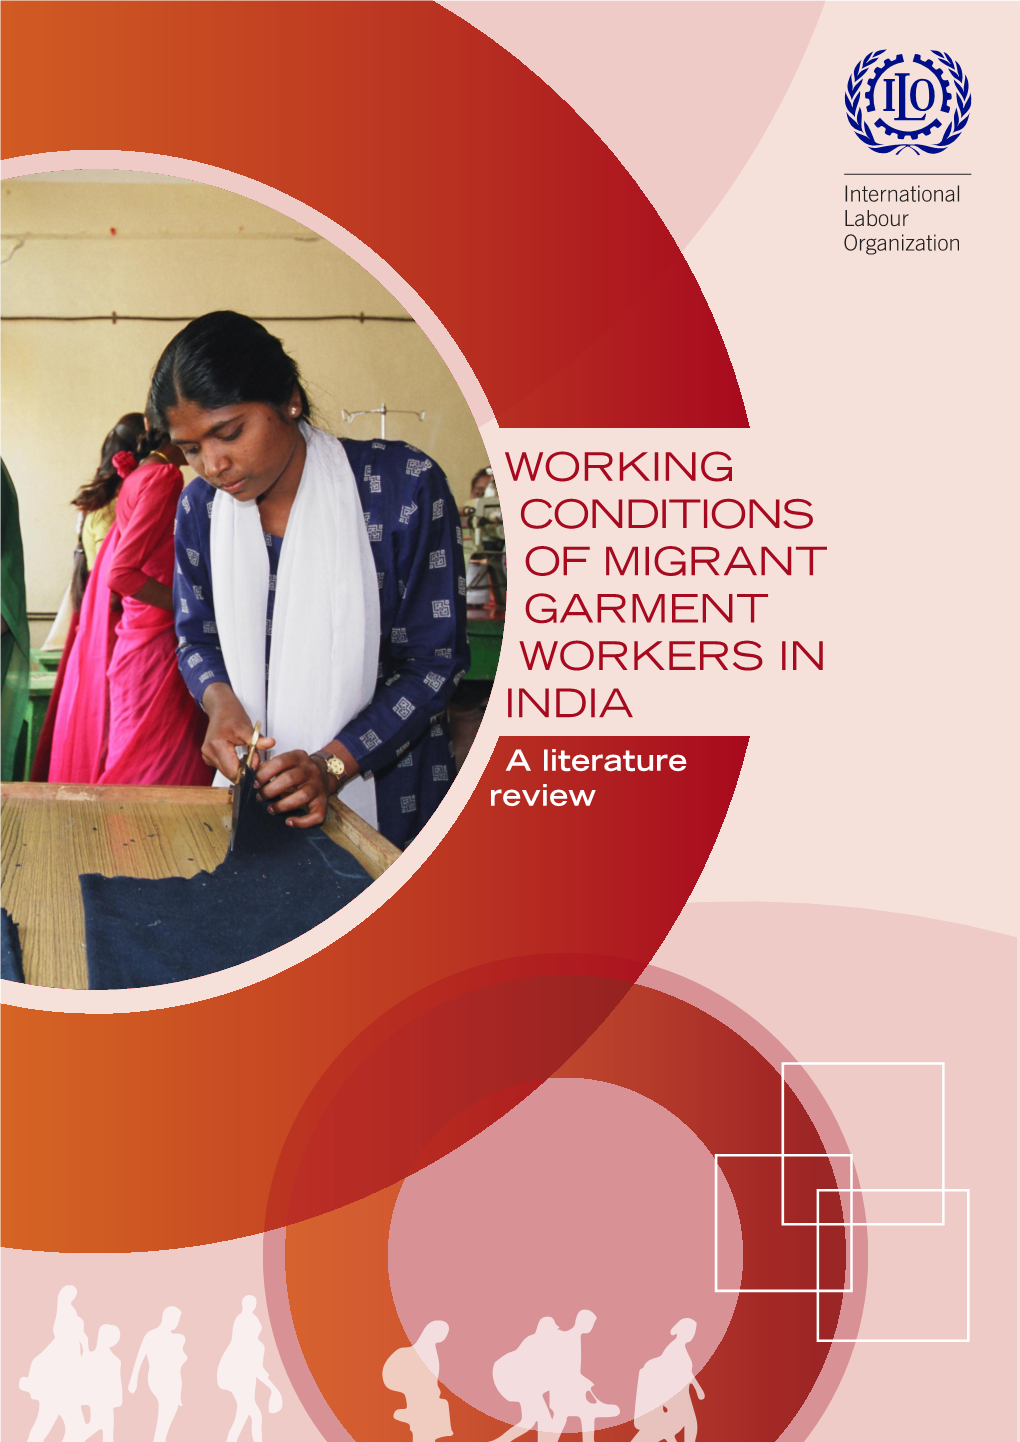 WORKING CONDITIONS of MIGRANT GARMENT WORKERS in INDIA a Literature Review